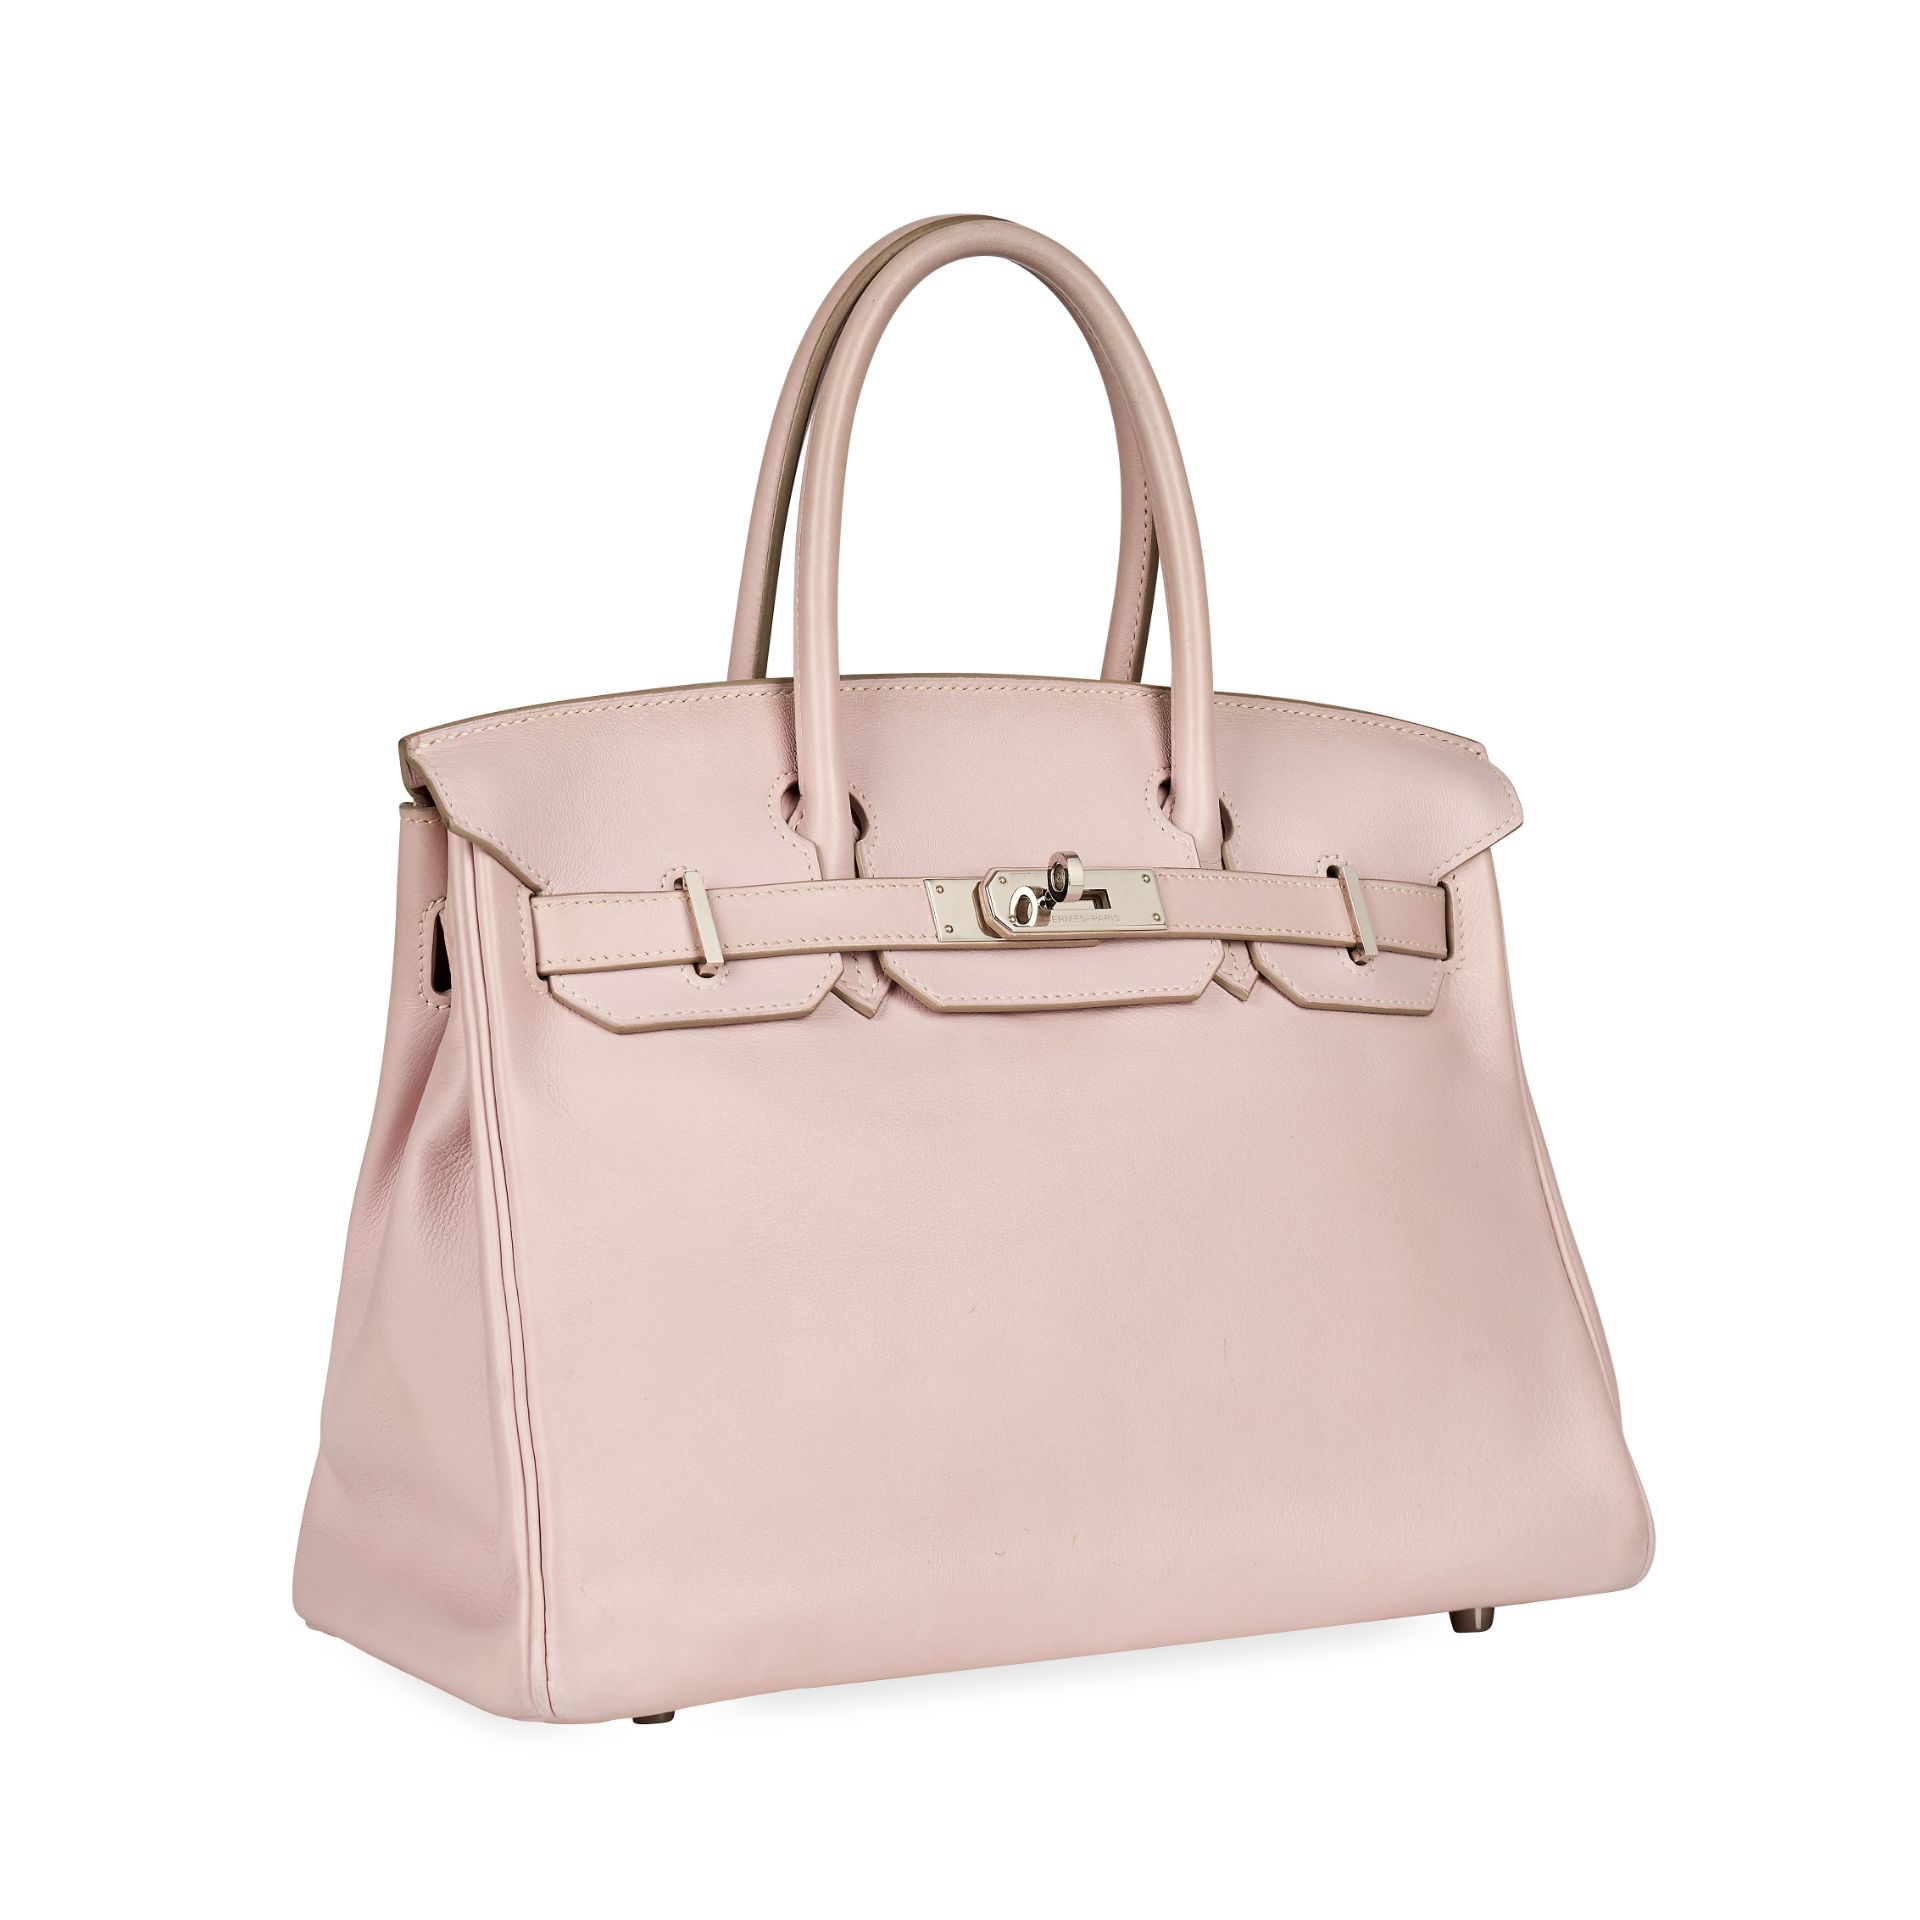 HERMES ROSE DRAGUEE BIRKIN 30 BAG Condition grade B-.  Produced in 2007. 30cm long, 23cm high. ... - Image 3 of 8